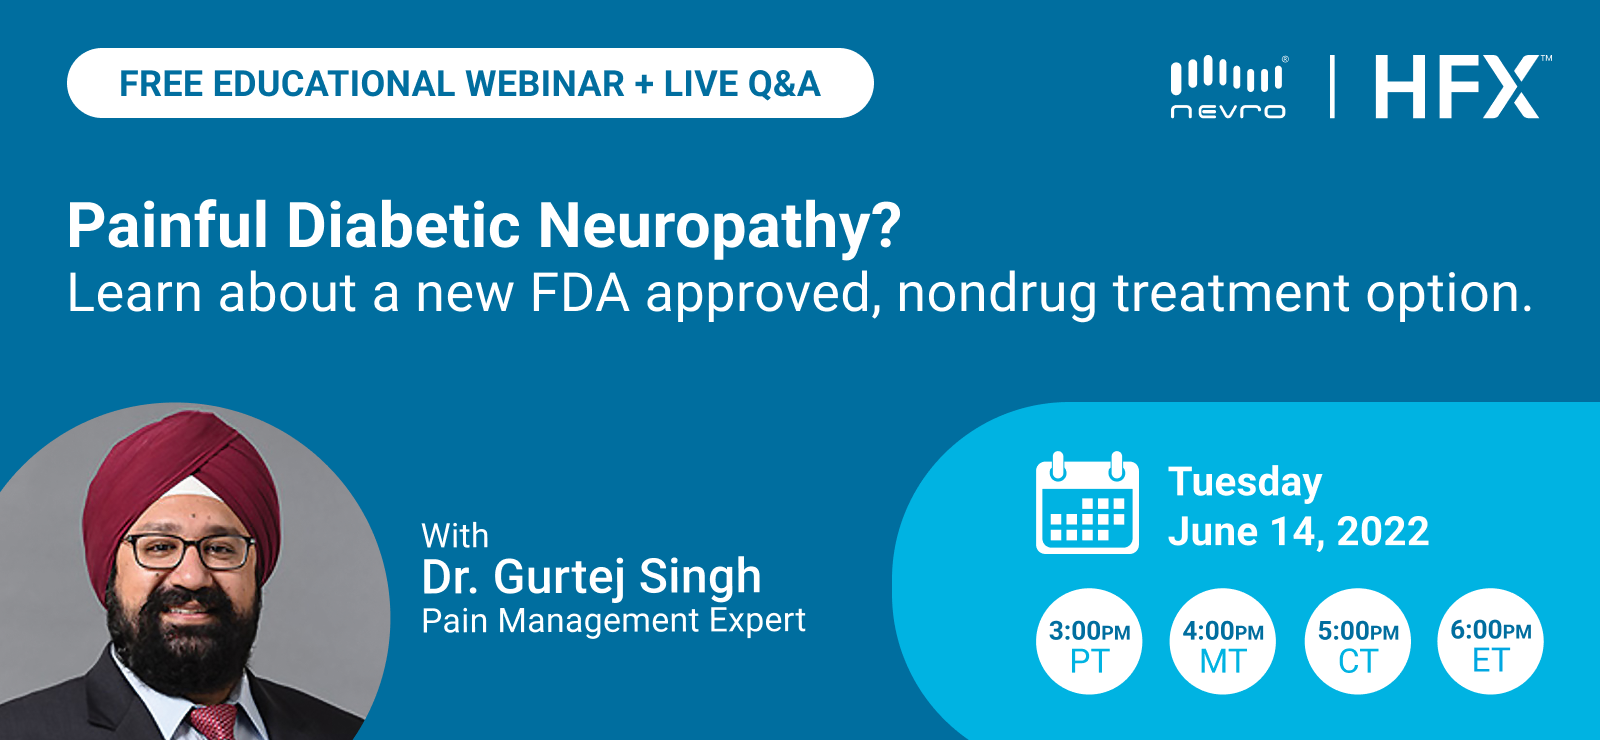 Learn About A New Nondrug Treatment for Painful Diabetic Neuropathy